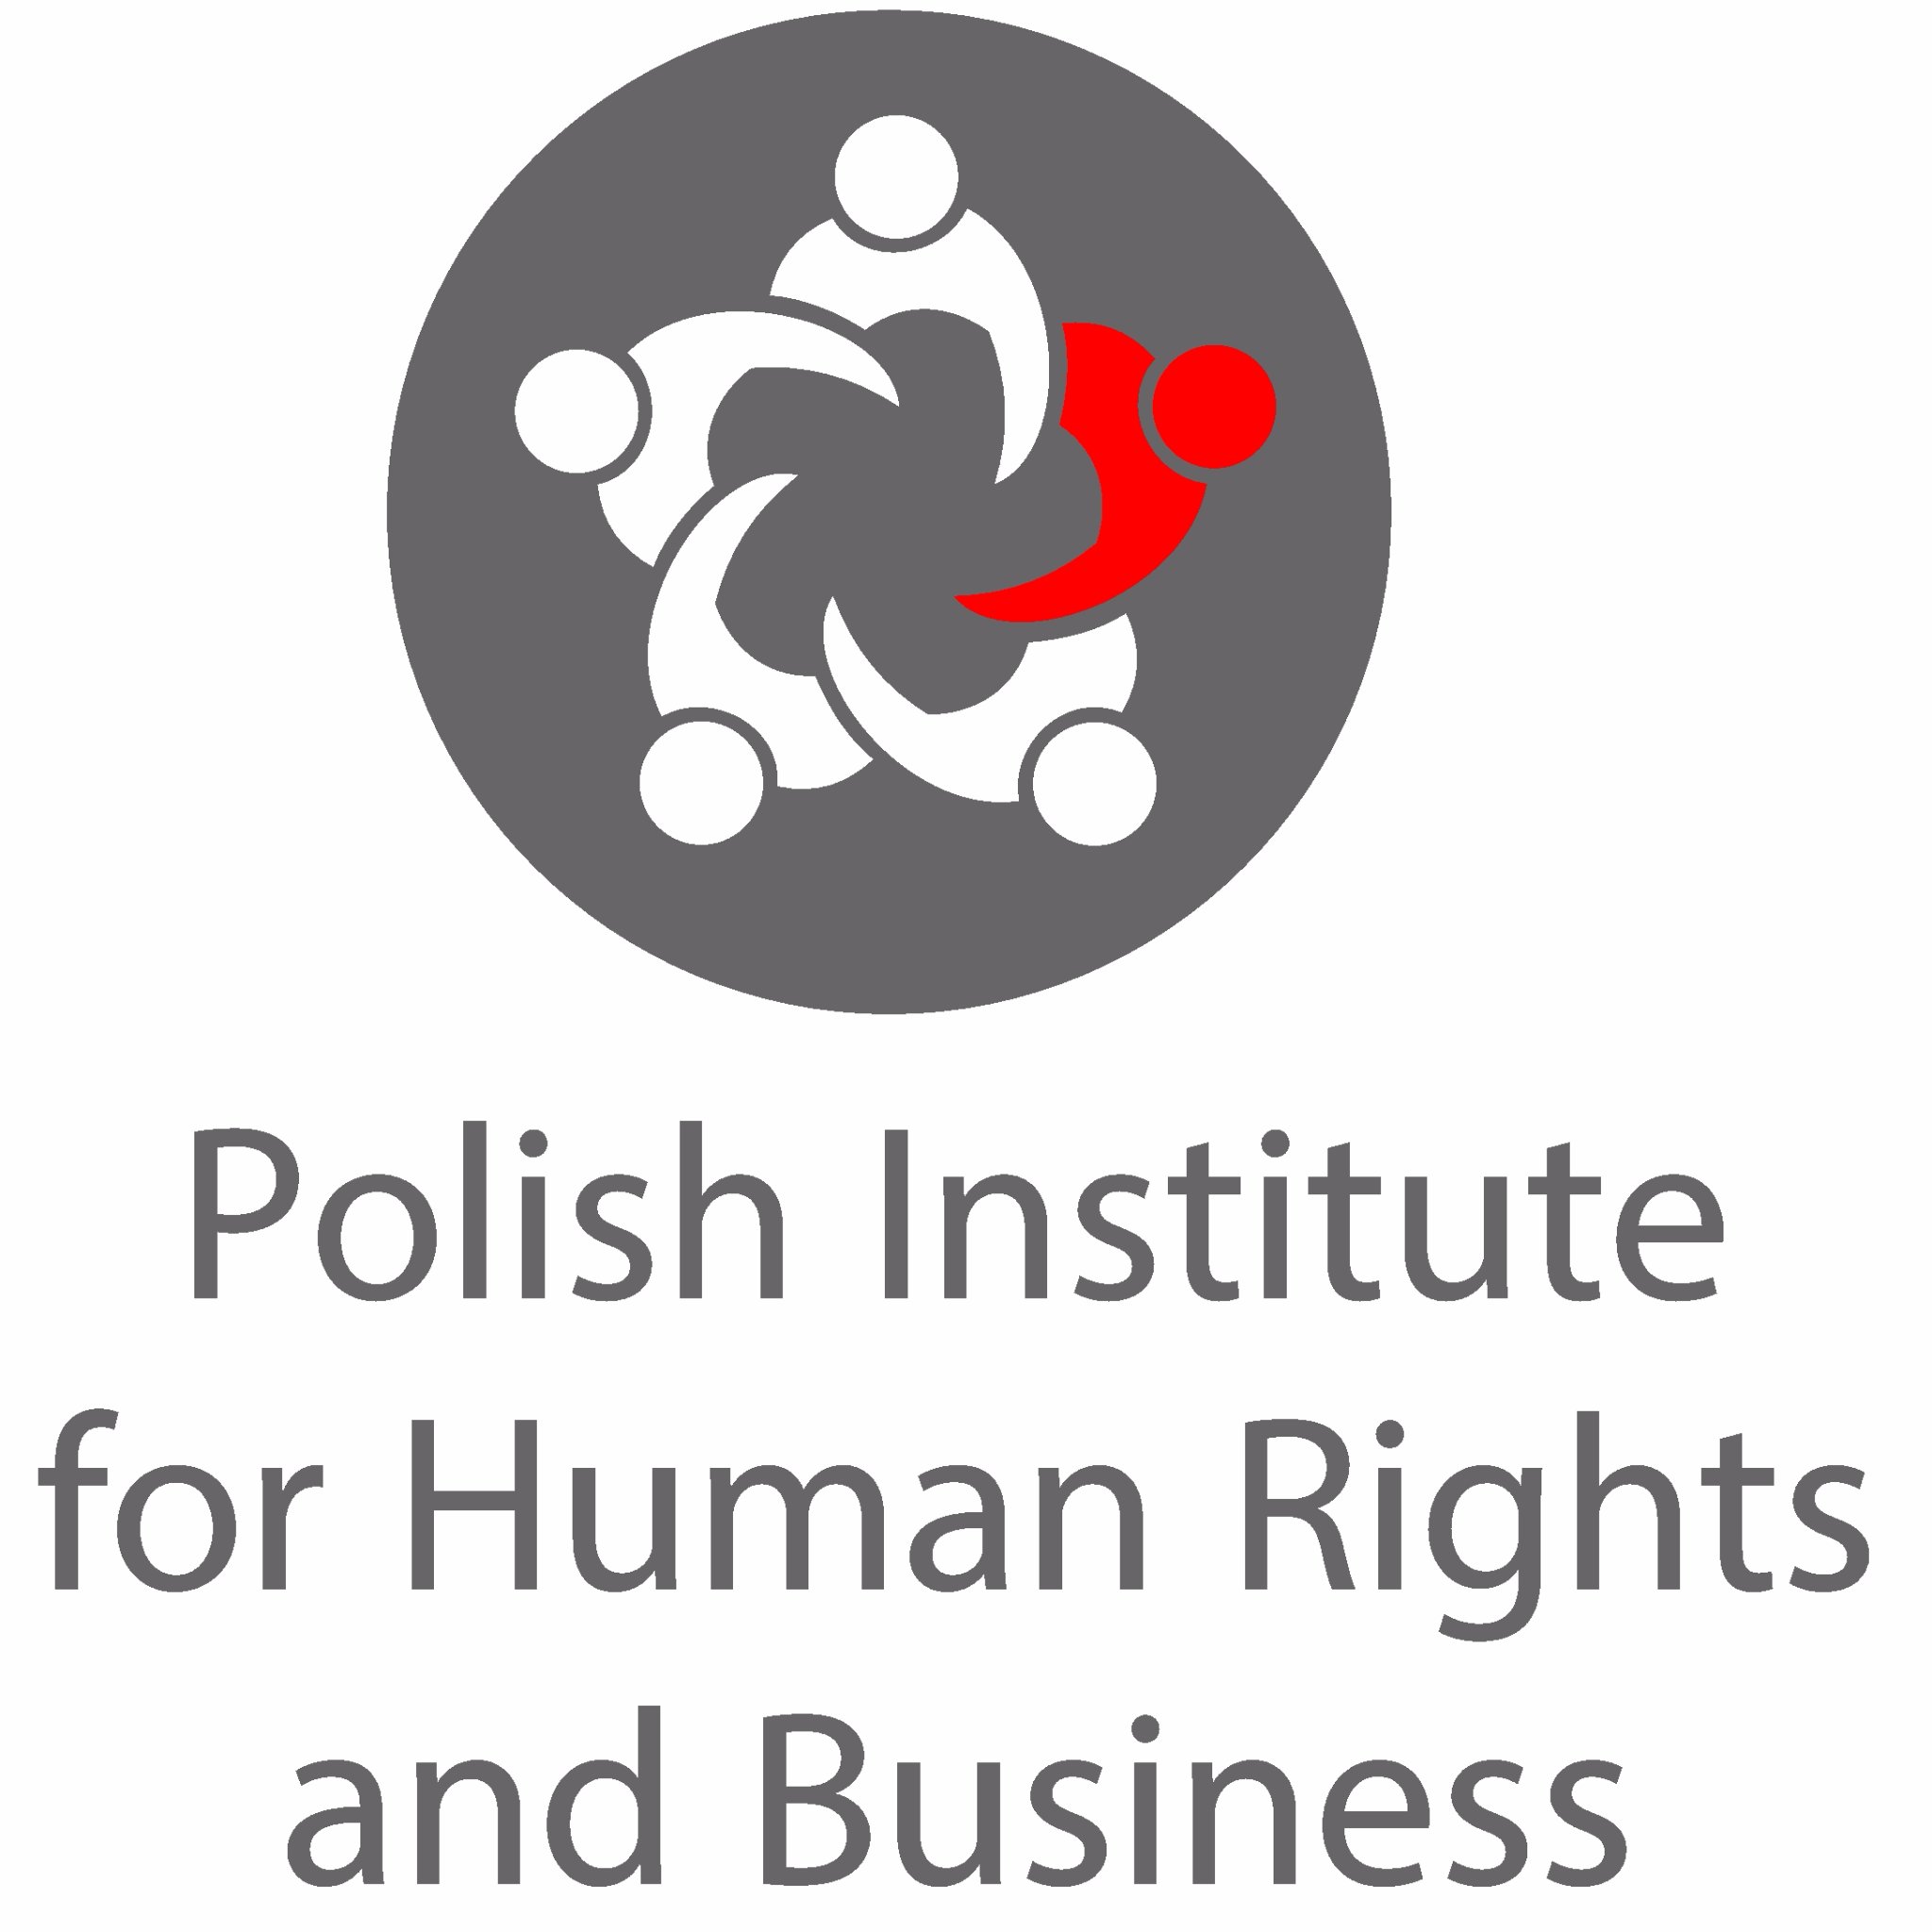 Using advanced expertise in Human Rights & Business to support implementation of the UNGPs and broader human rights & business agenda in Poland and beyond.